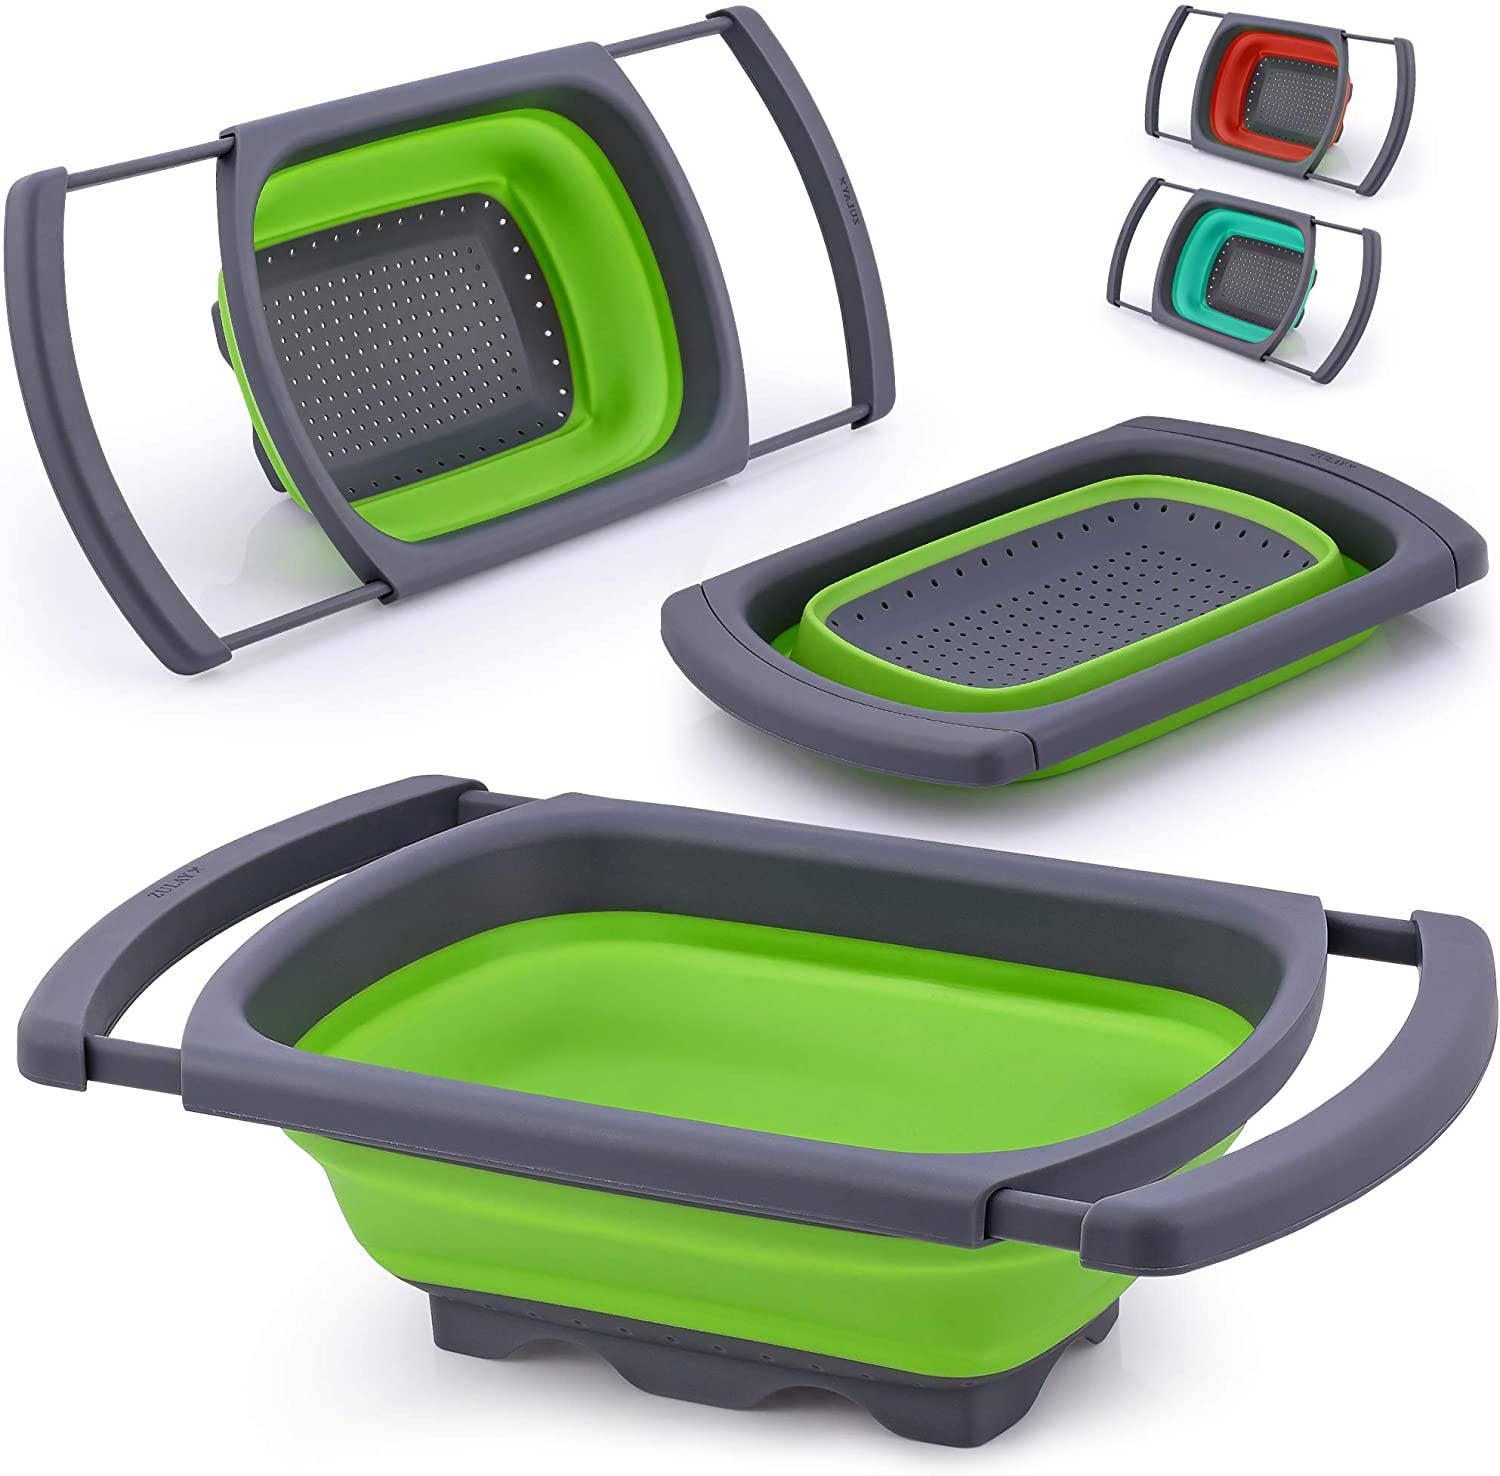 Zulay Kitchen - Collapsible Colander With Extendable Handles